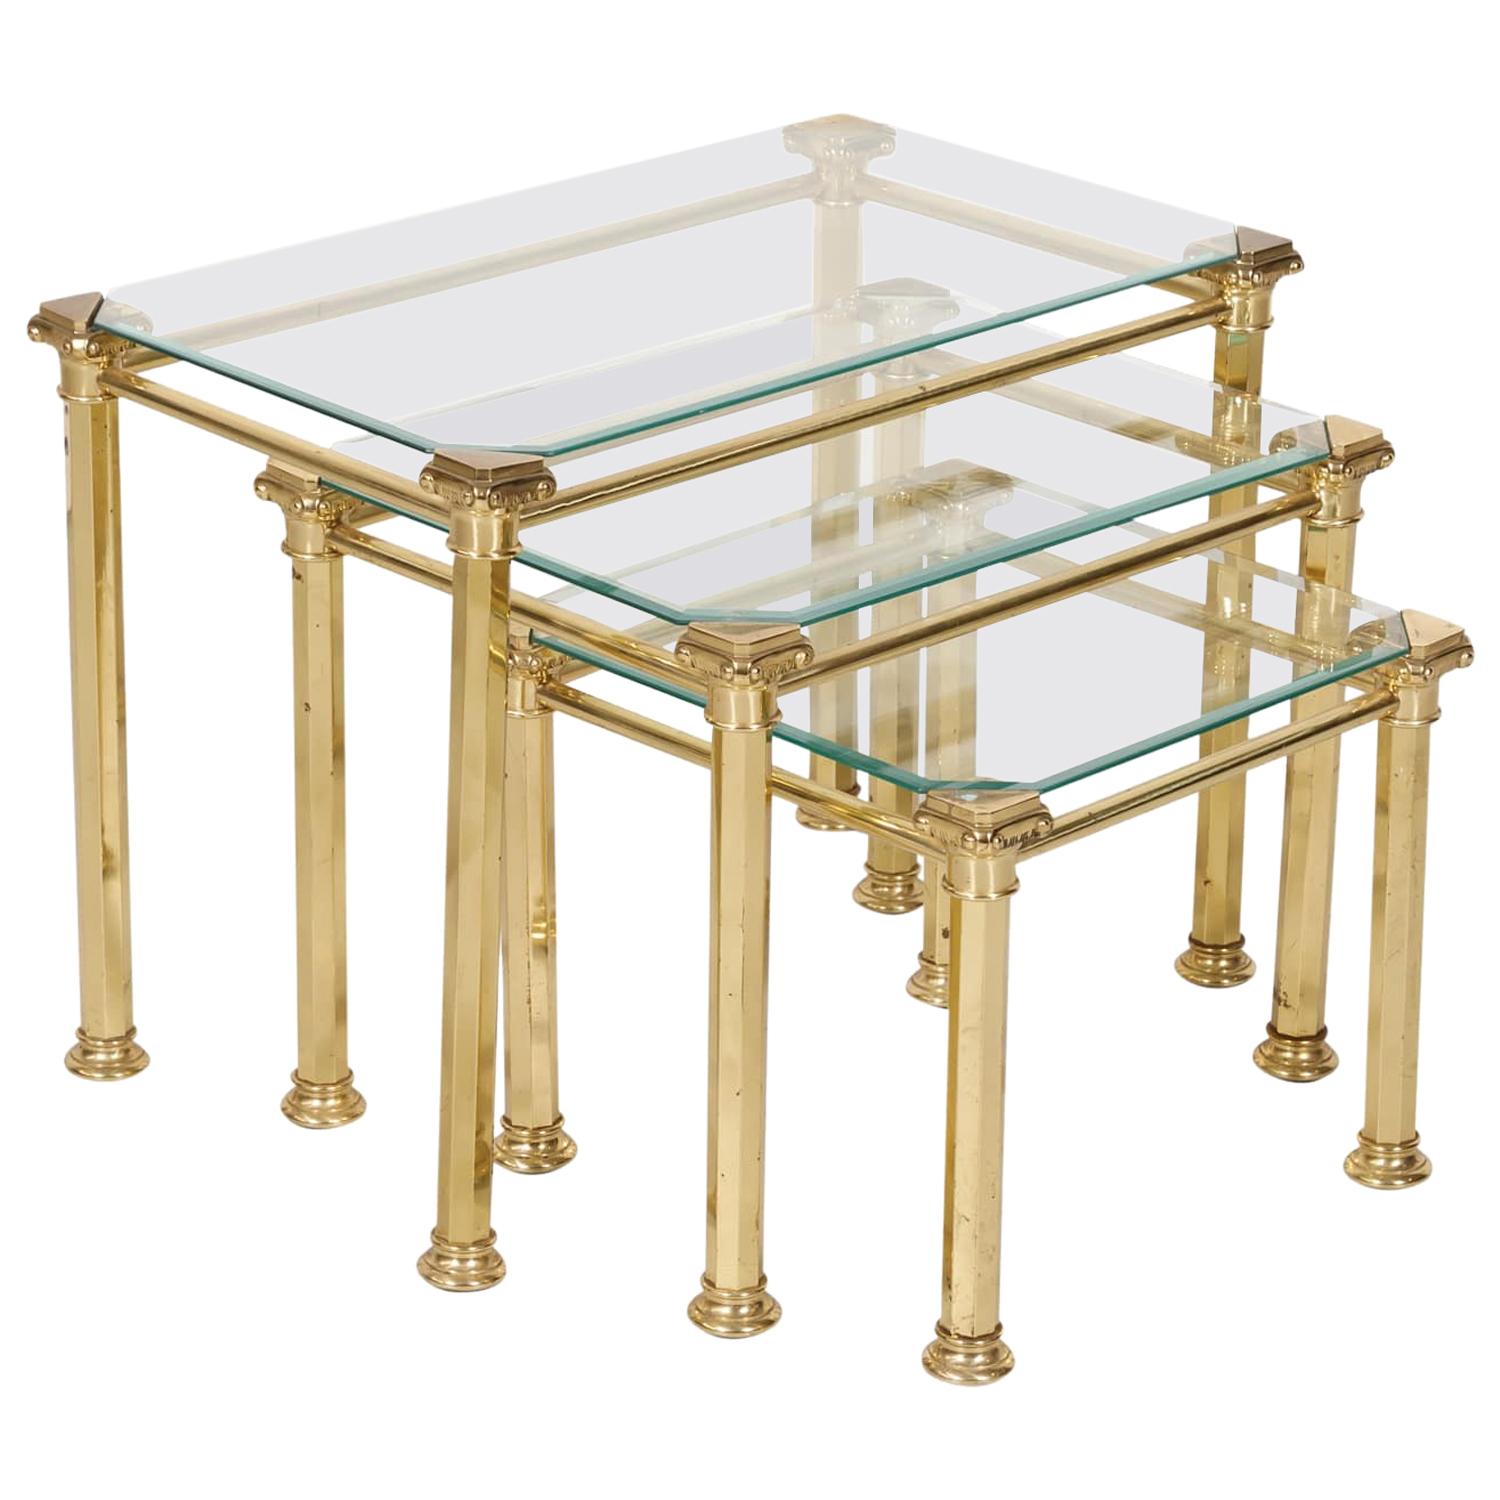 Set of Three French Mid-Century Modern Brass and Glass Nesting Tables by Maison